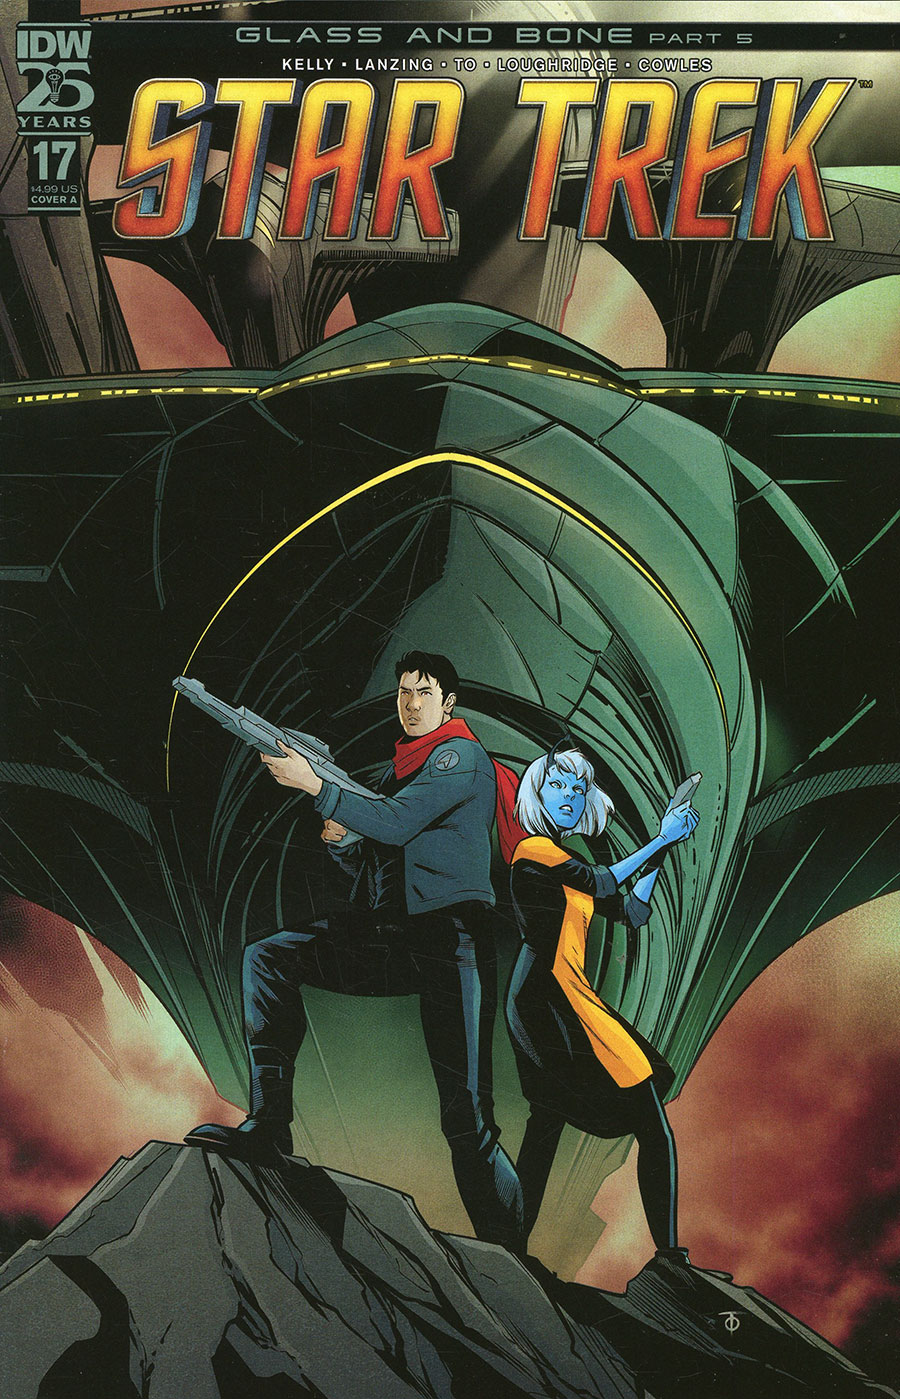 Star Trek (IDW) Vol 2 #17 Cover A Regular Marcus To Cover